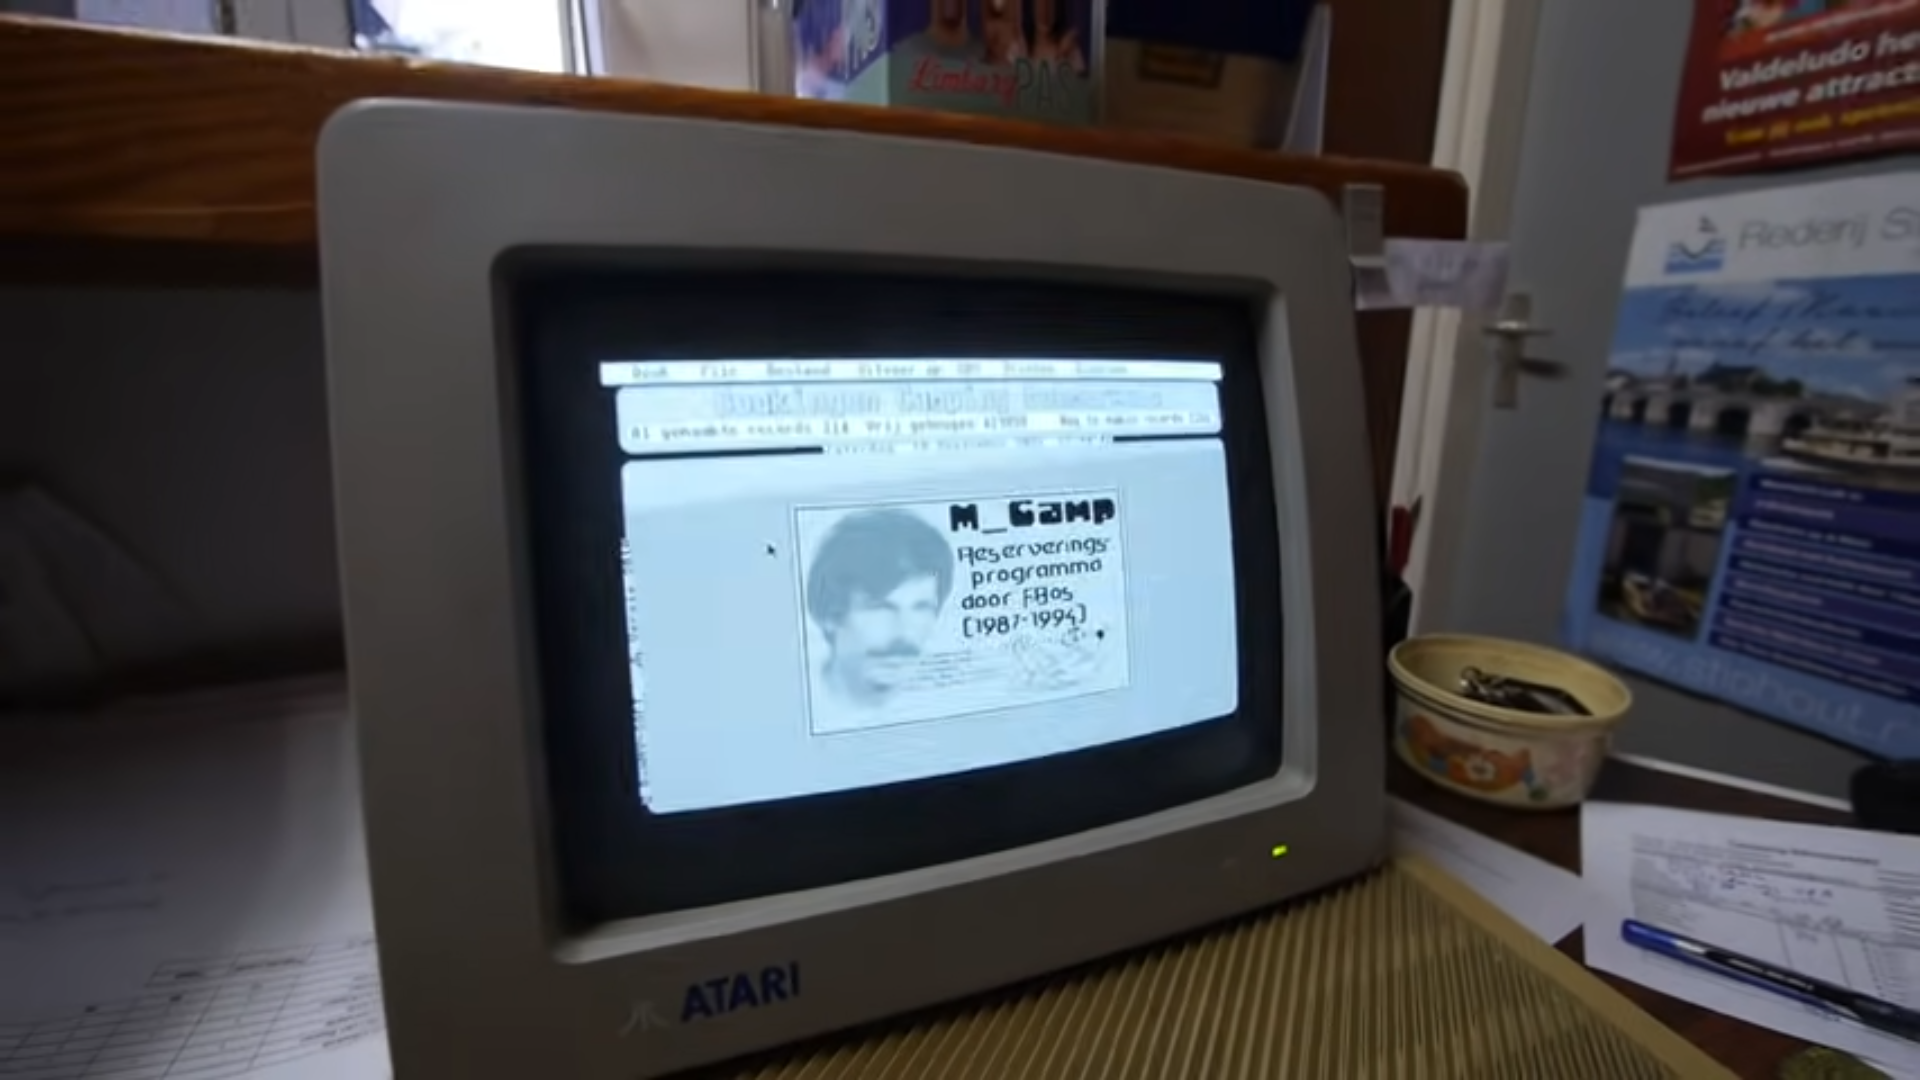 The Atari ST running Frans Bos's software for managing his campsite.